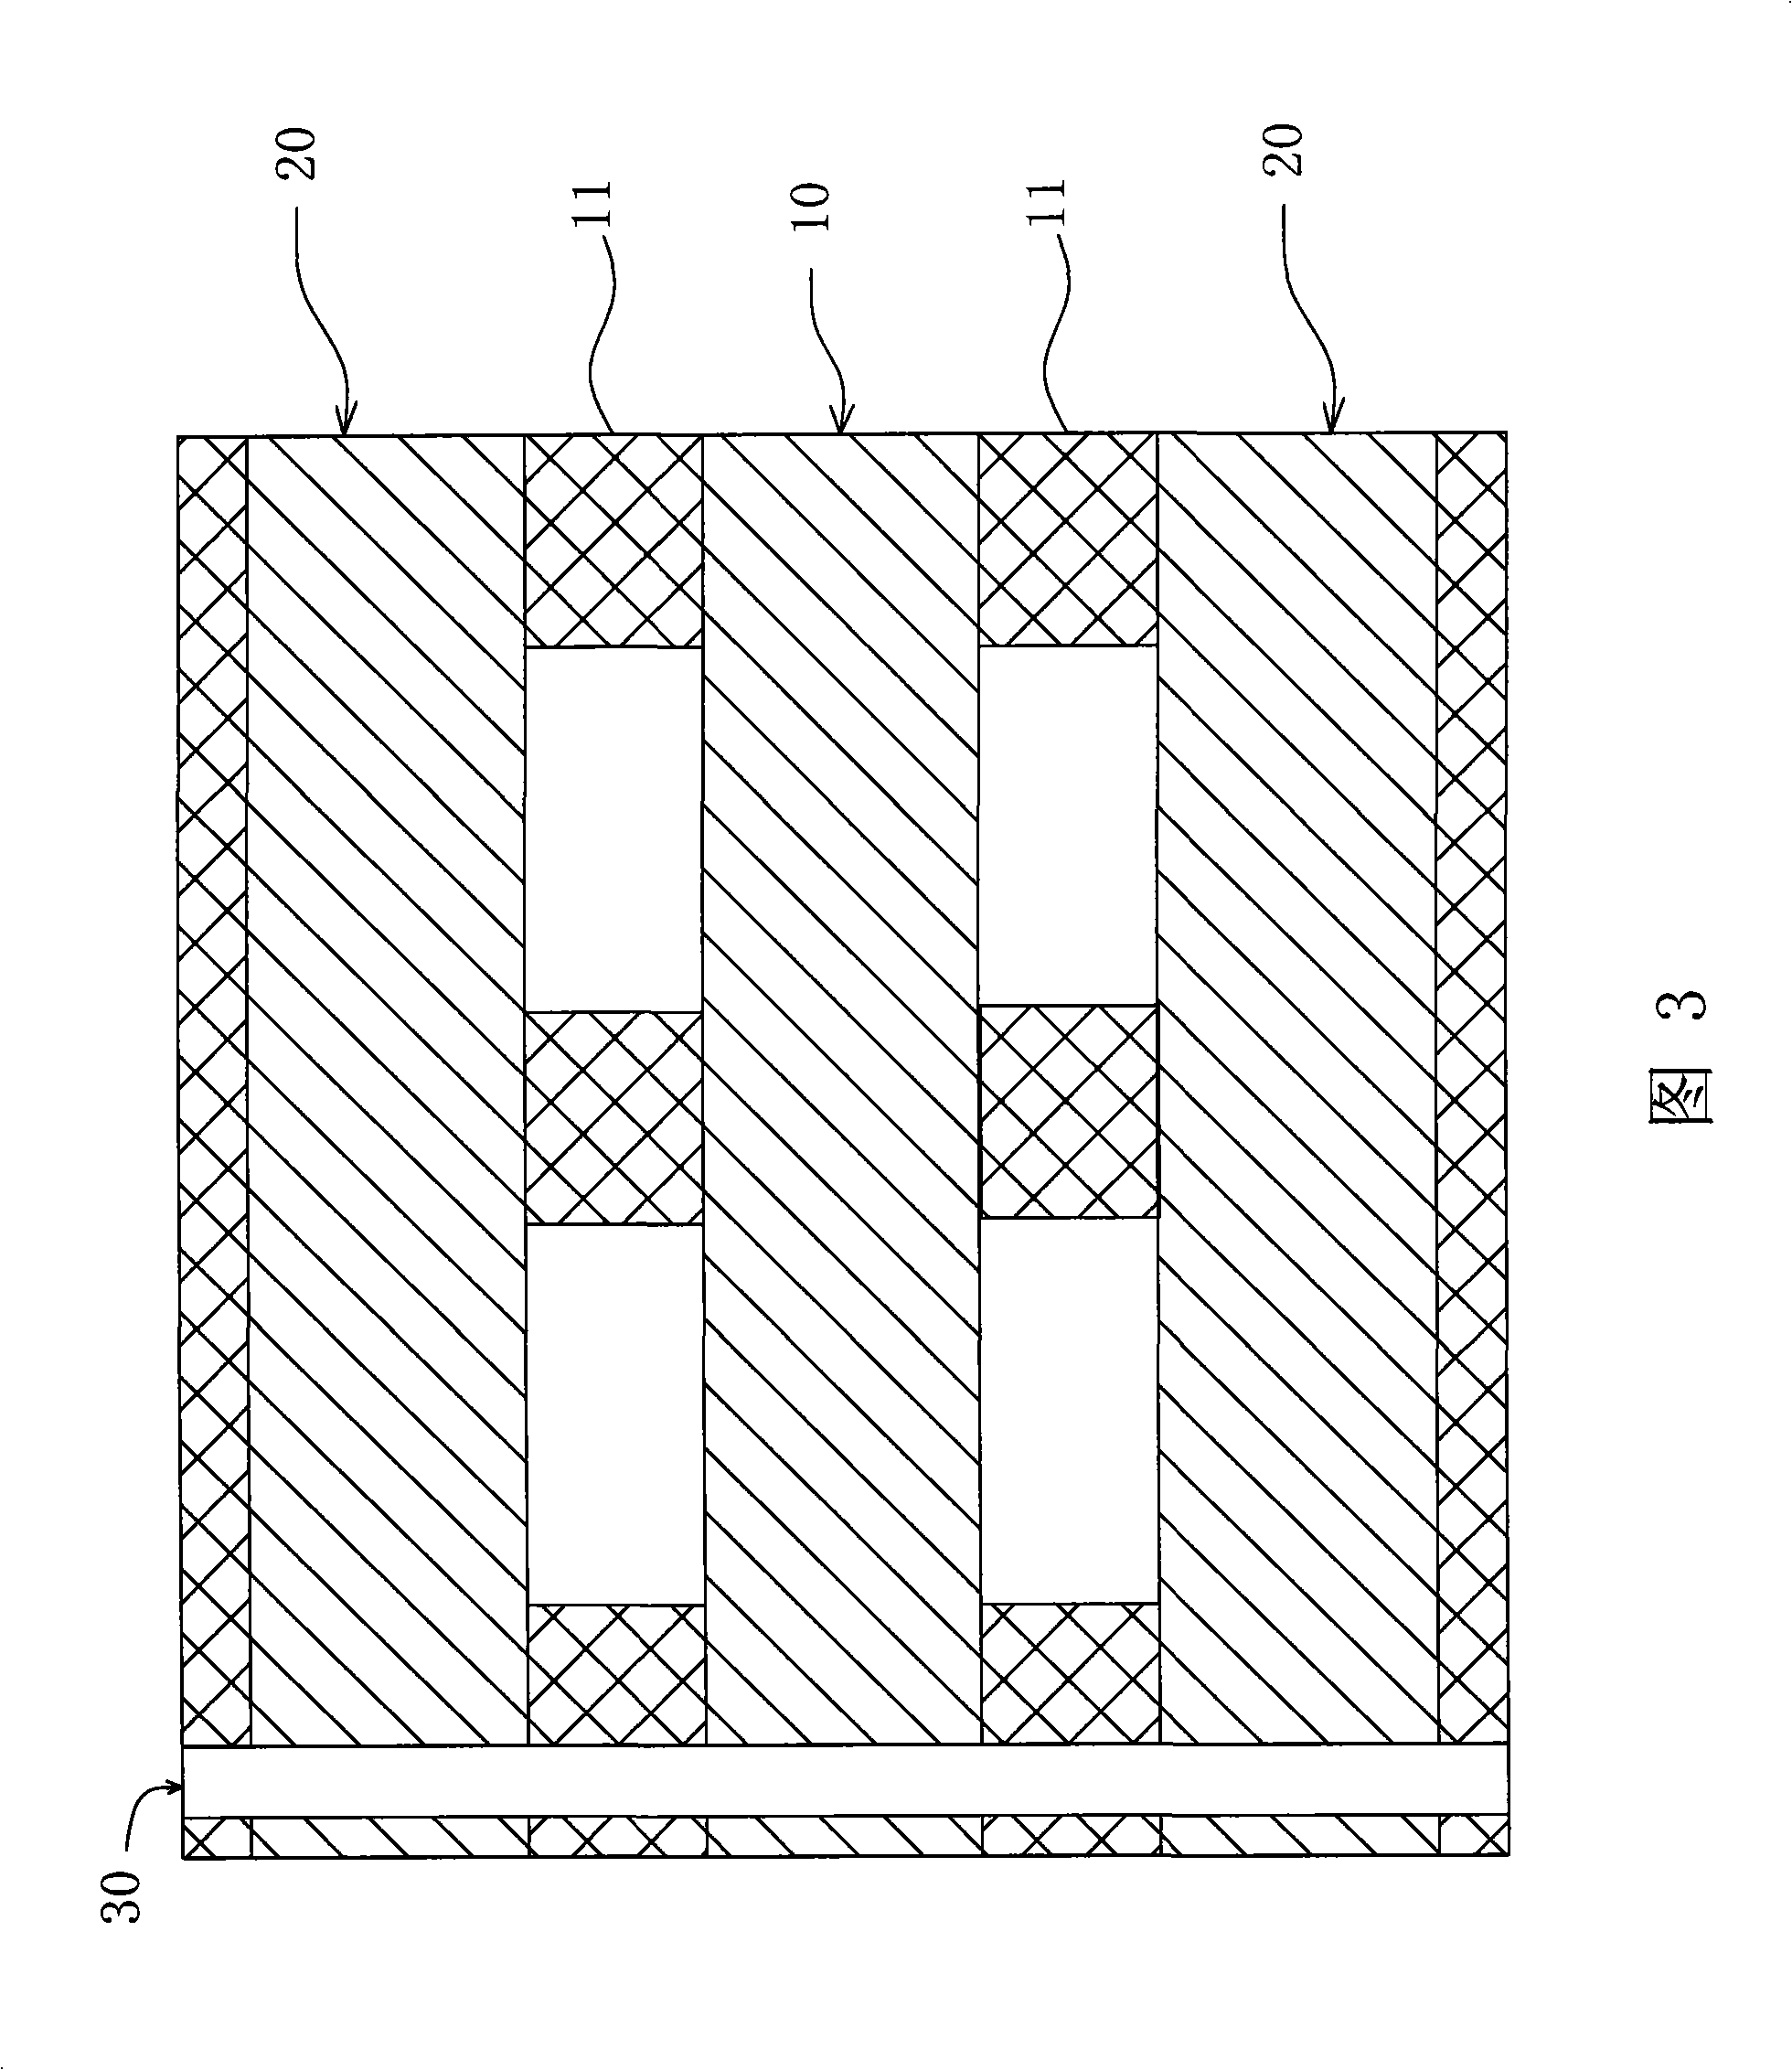 Control method for laser drilling contraposition accuracy of high-density lamination circuit board